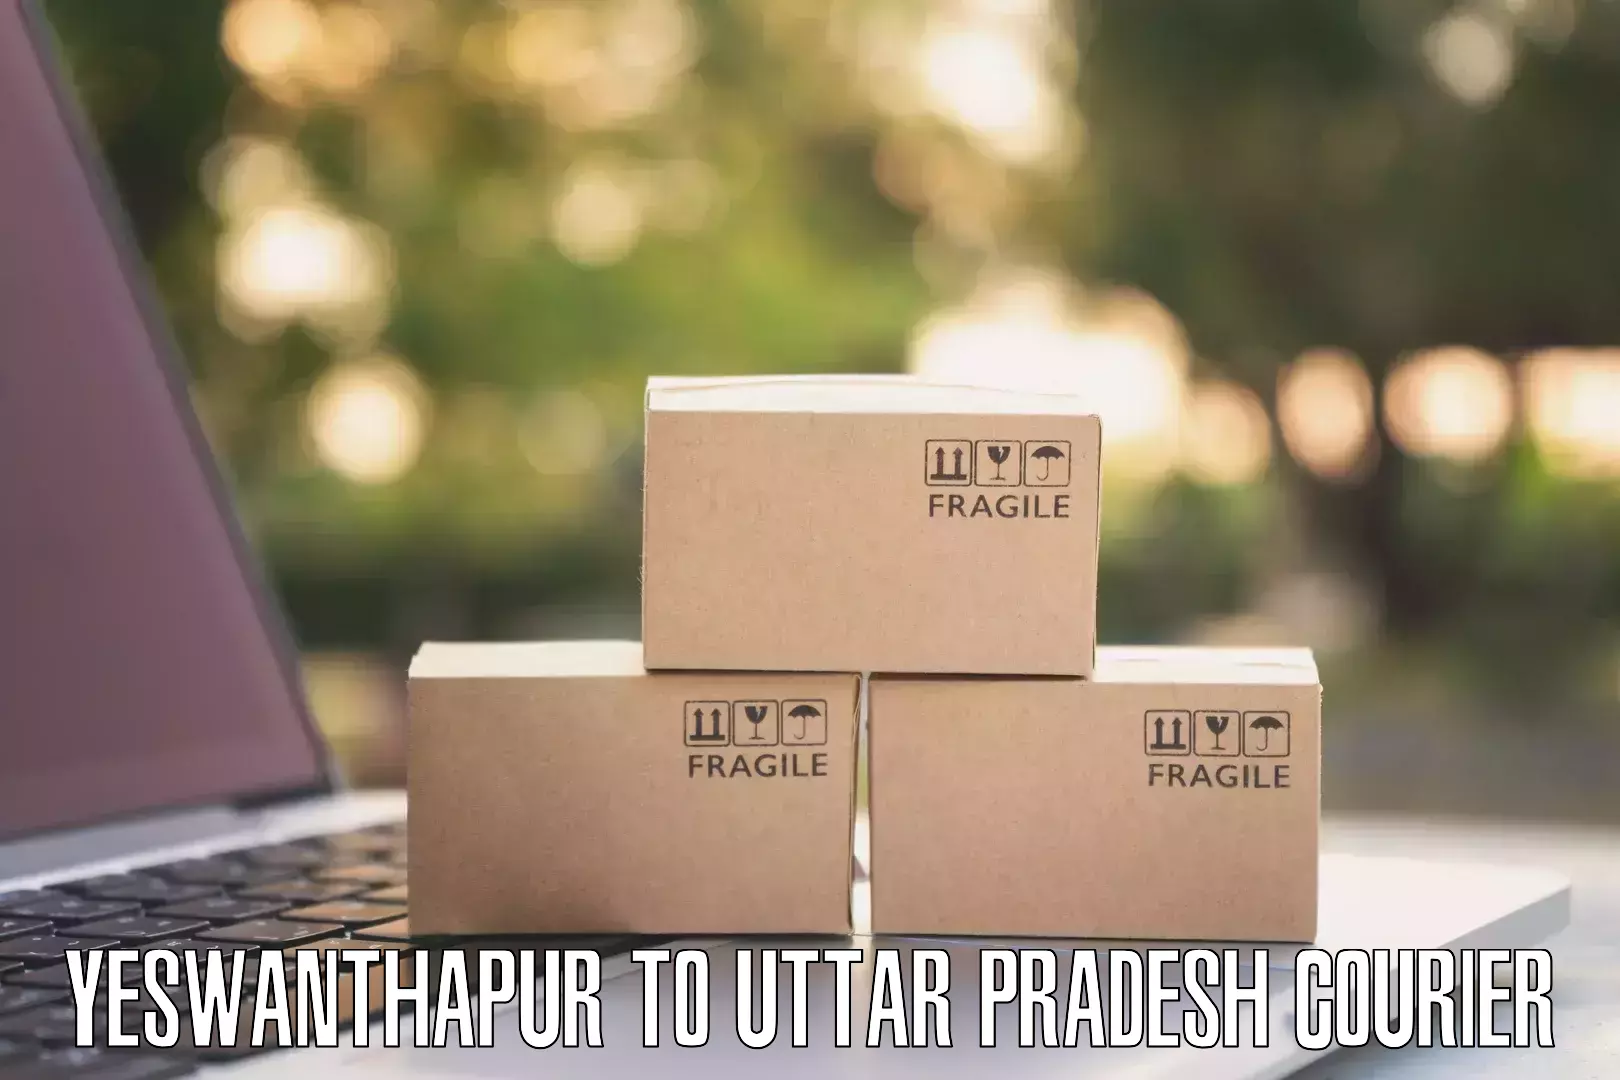 Quality courier partnerships Yeswanthapur to Jhansi